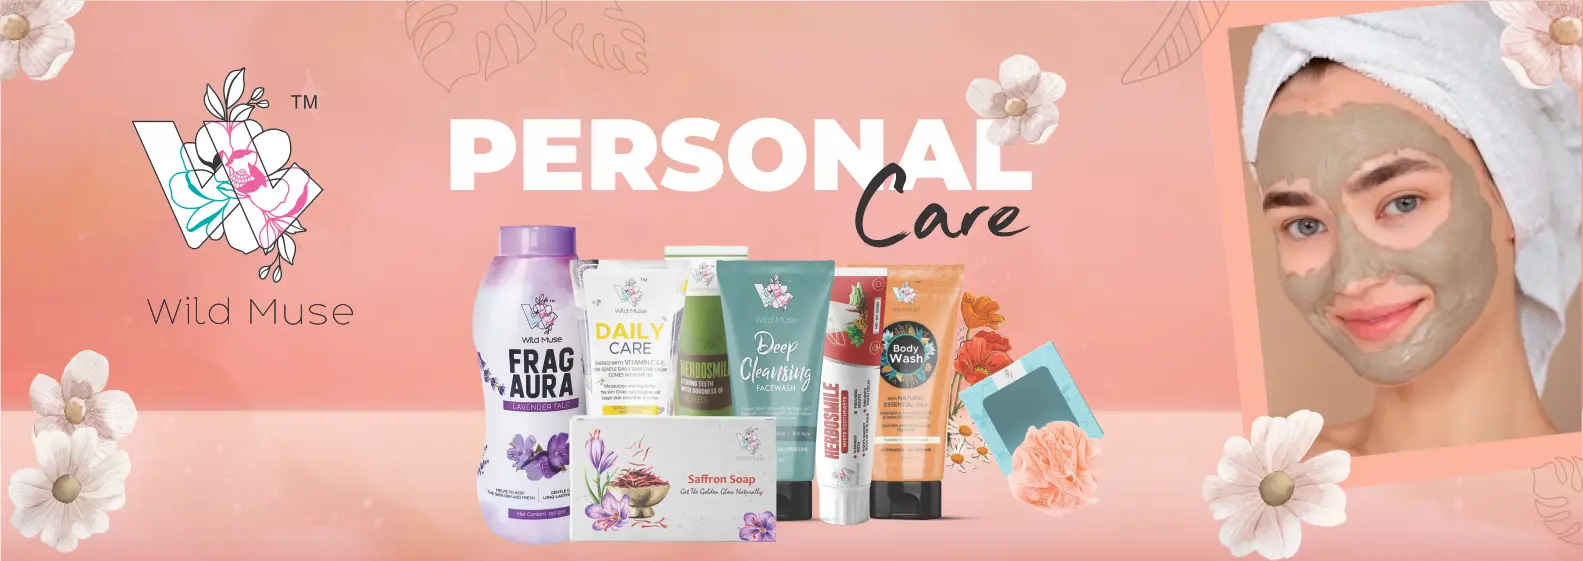 Wild Muse- Buy Personal Care Products